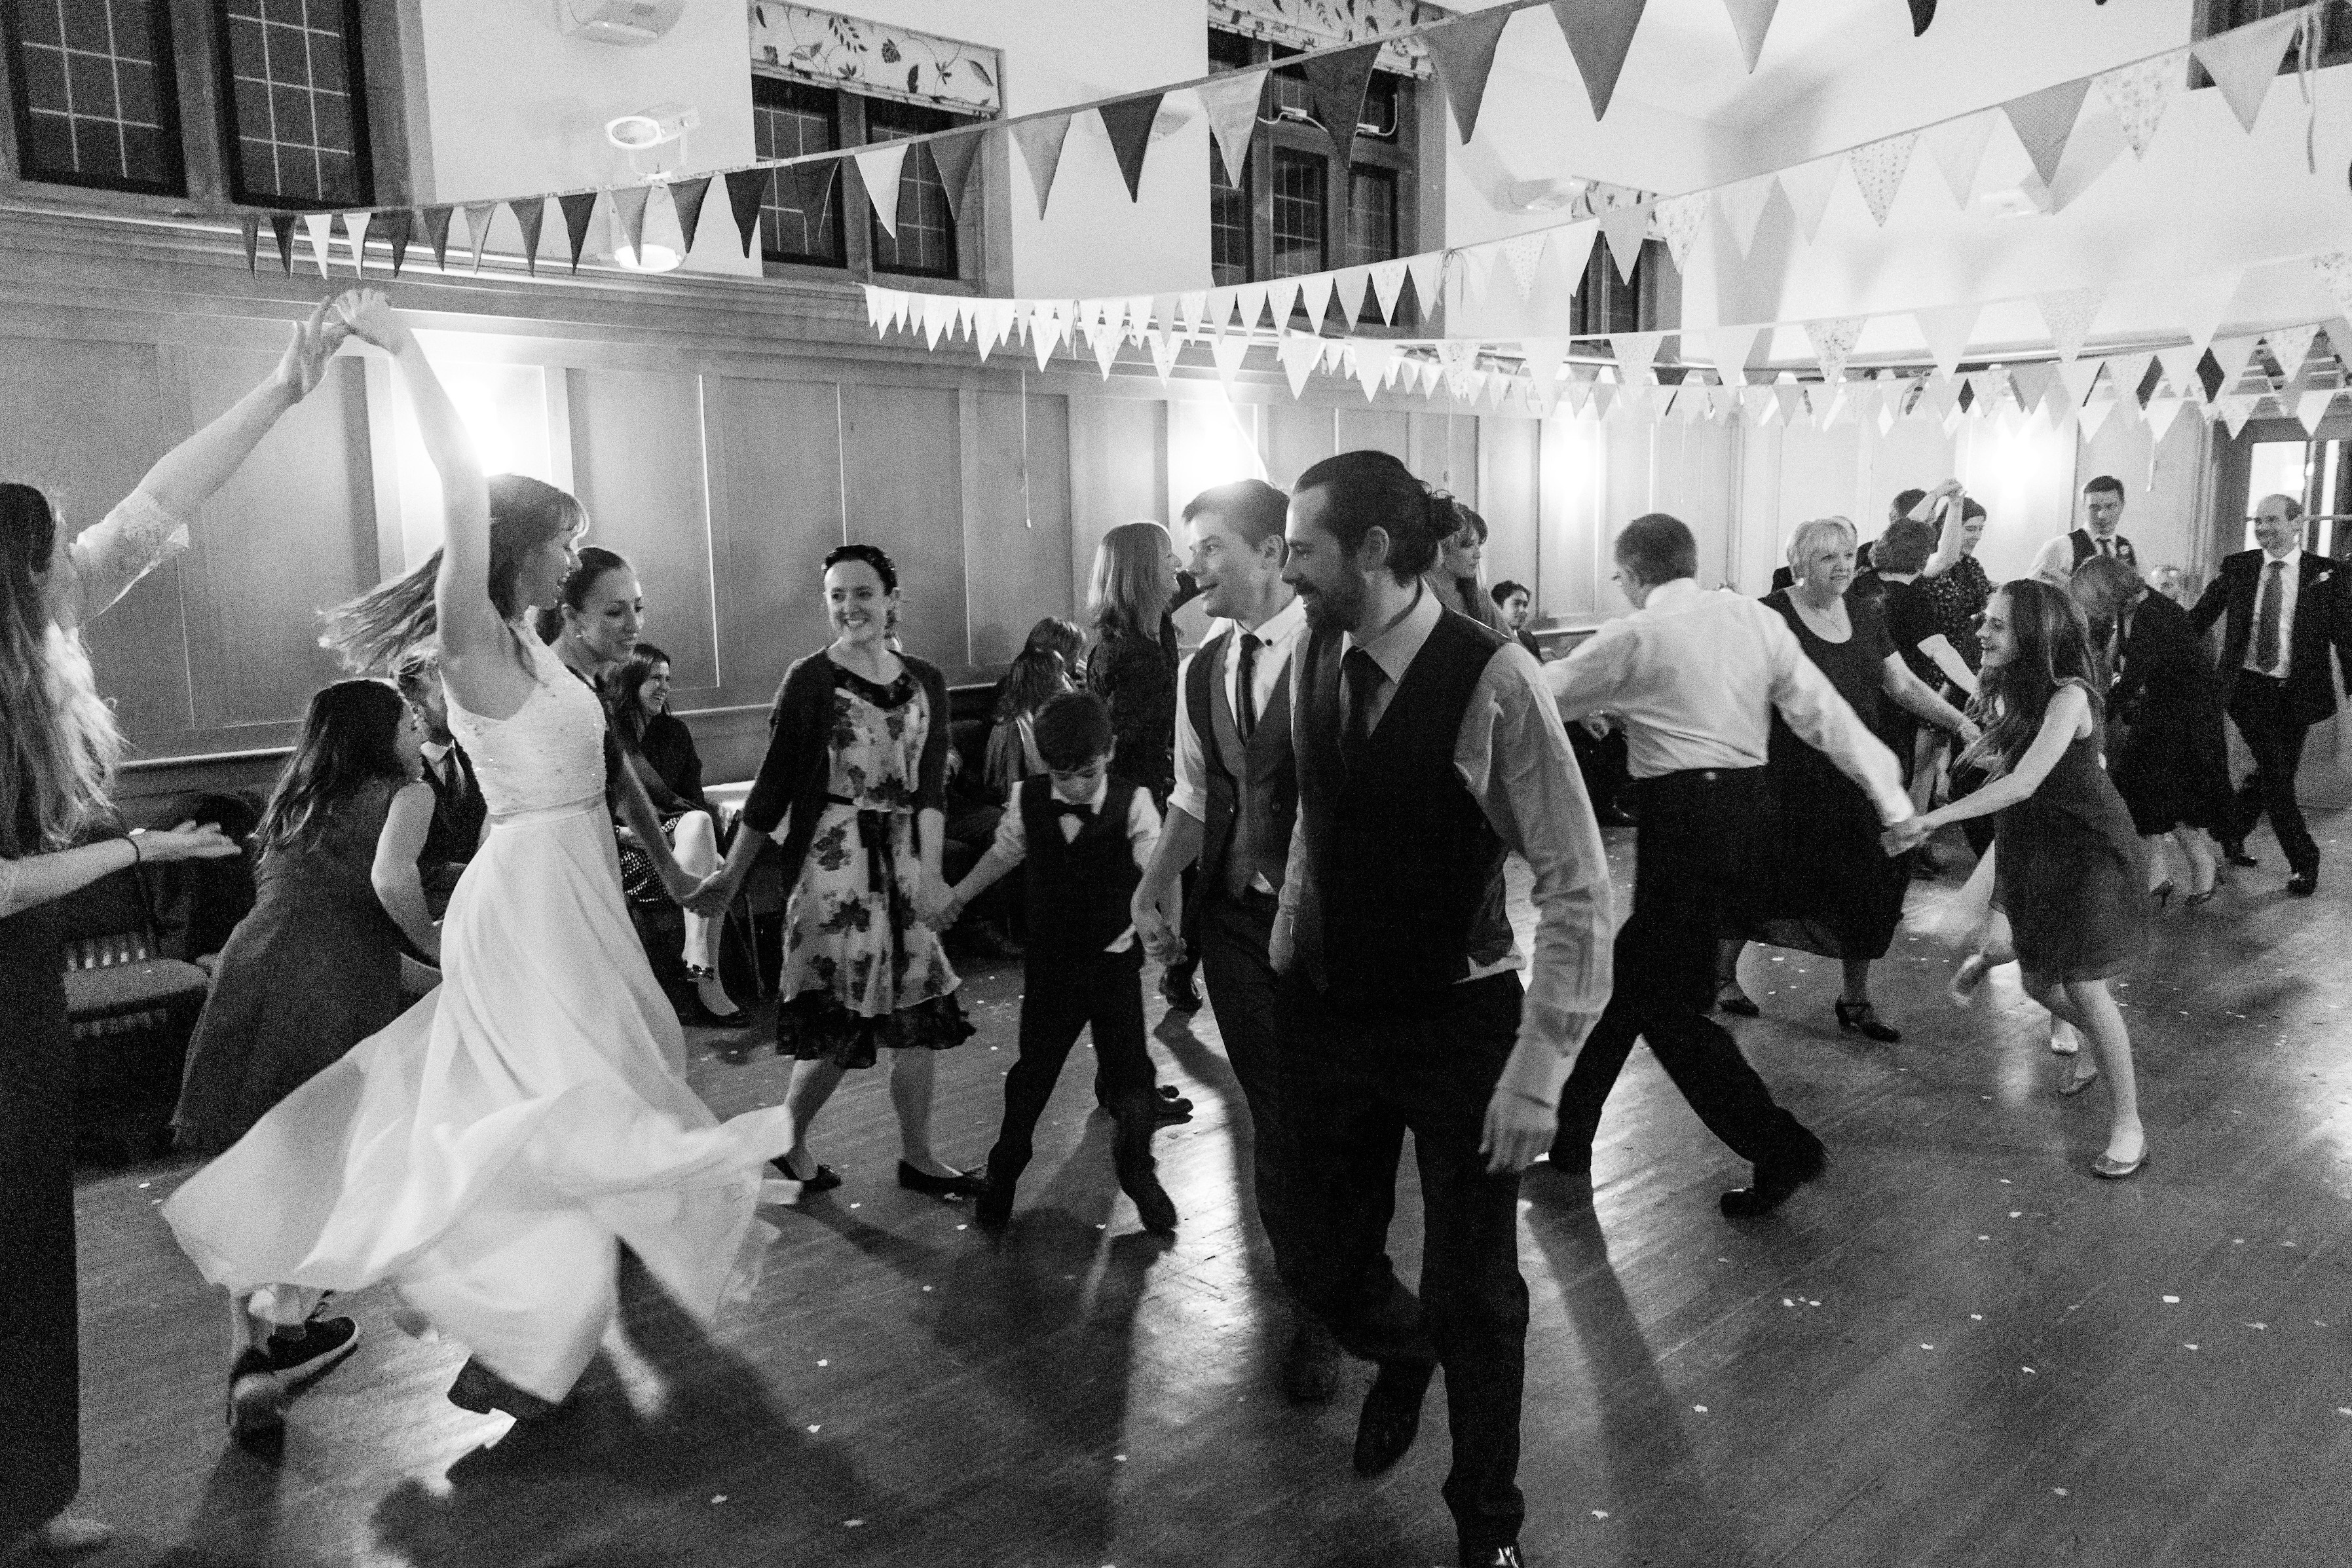 Black and white photo of people dancing.